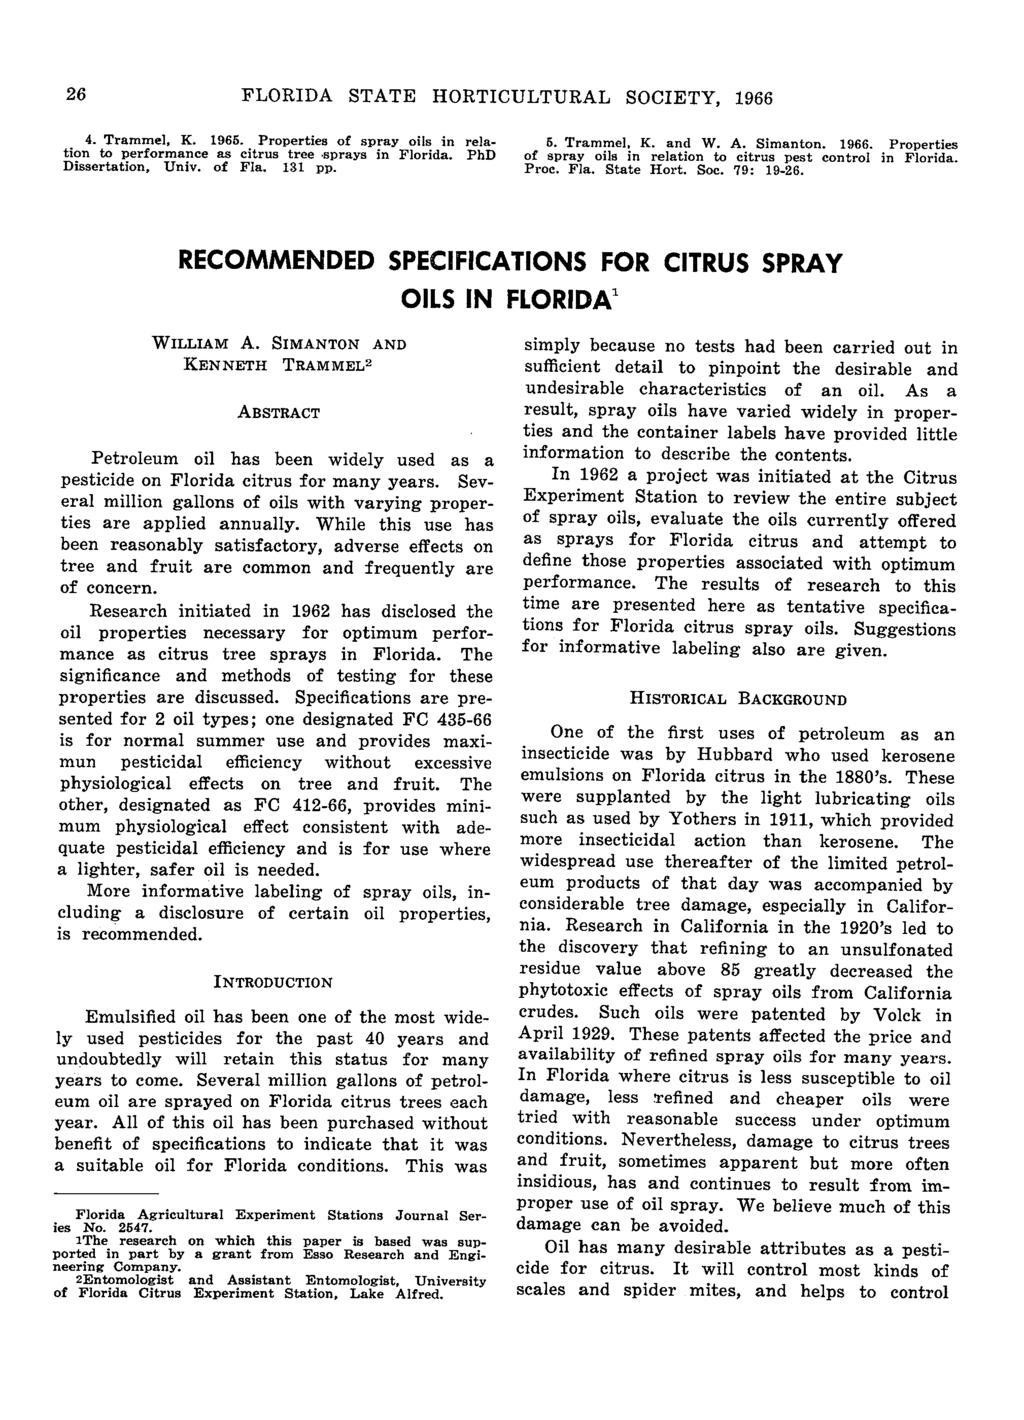 FLORIDA STATE HORTICULTURAL SOCIETY, 9. Trmmel, K. 9. Properties of spry oils in rel tion to performnce s citrus tree sprys in Florid. PhD Disserttion, Univ. of Fl. pp.. Trmmel, K. nd W. A. Simnton.